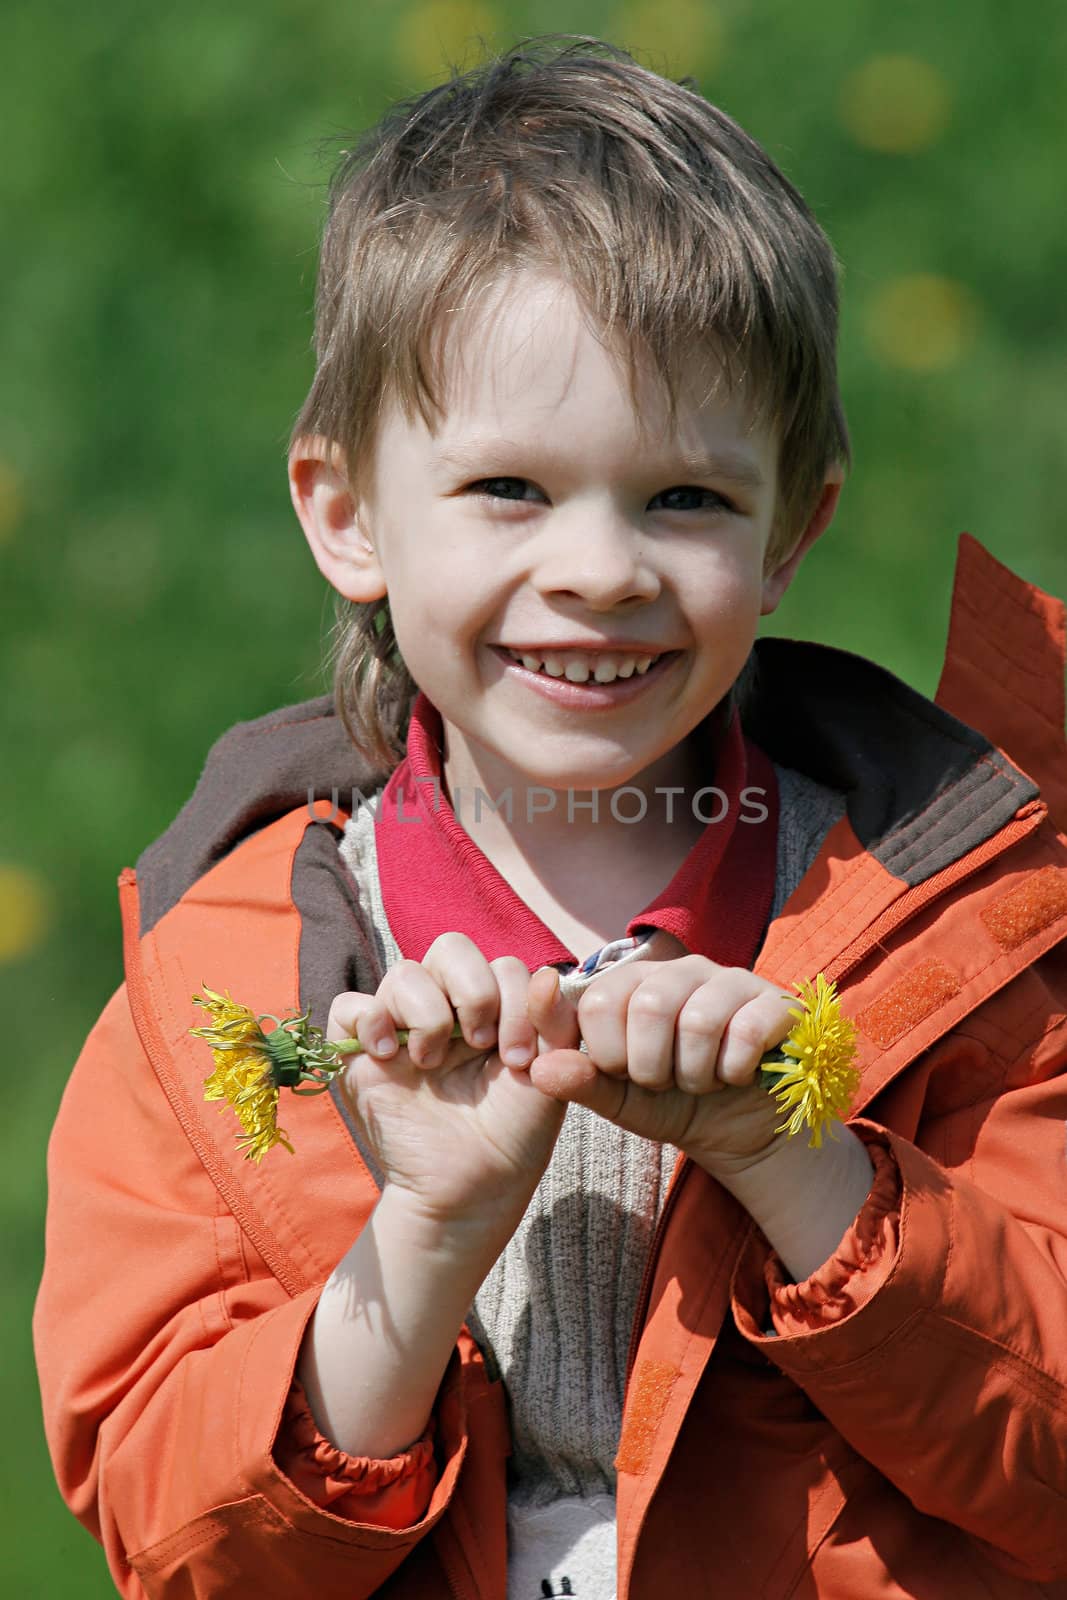 Young boy enjoy summer time in the dandelion meadow.